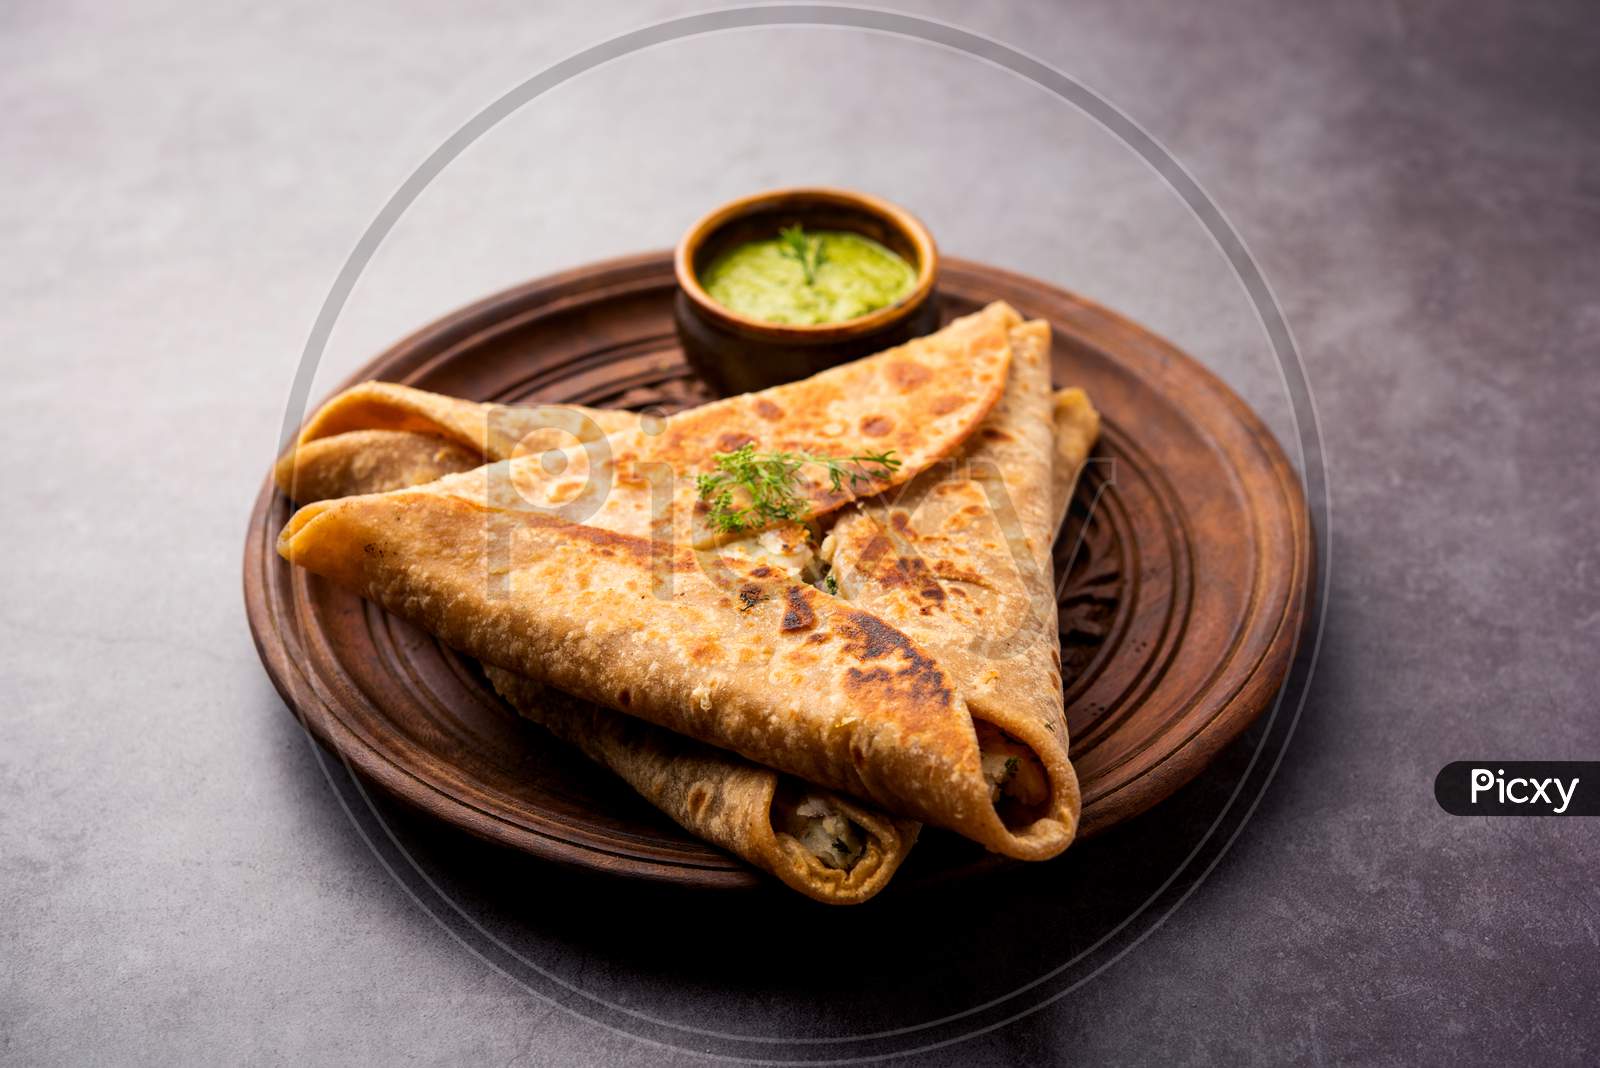 Indian Food Triangle Shape Paratha Wrap Served With Chutney